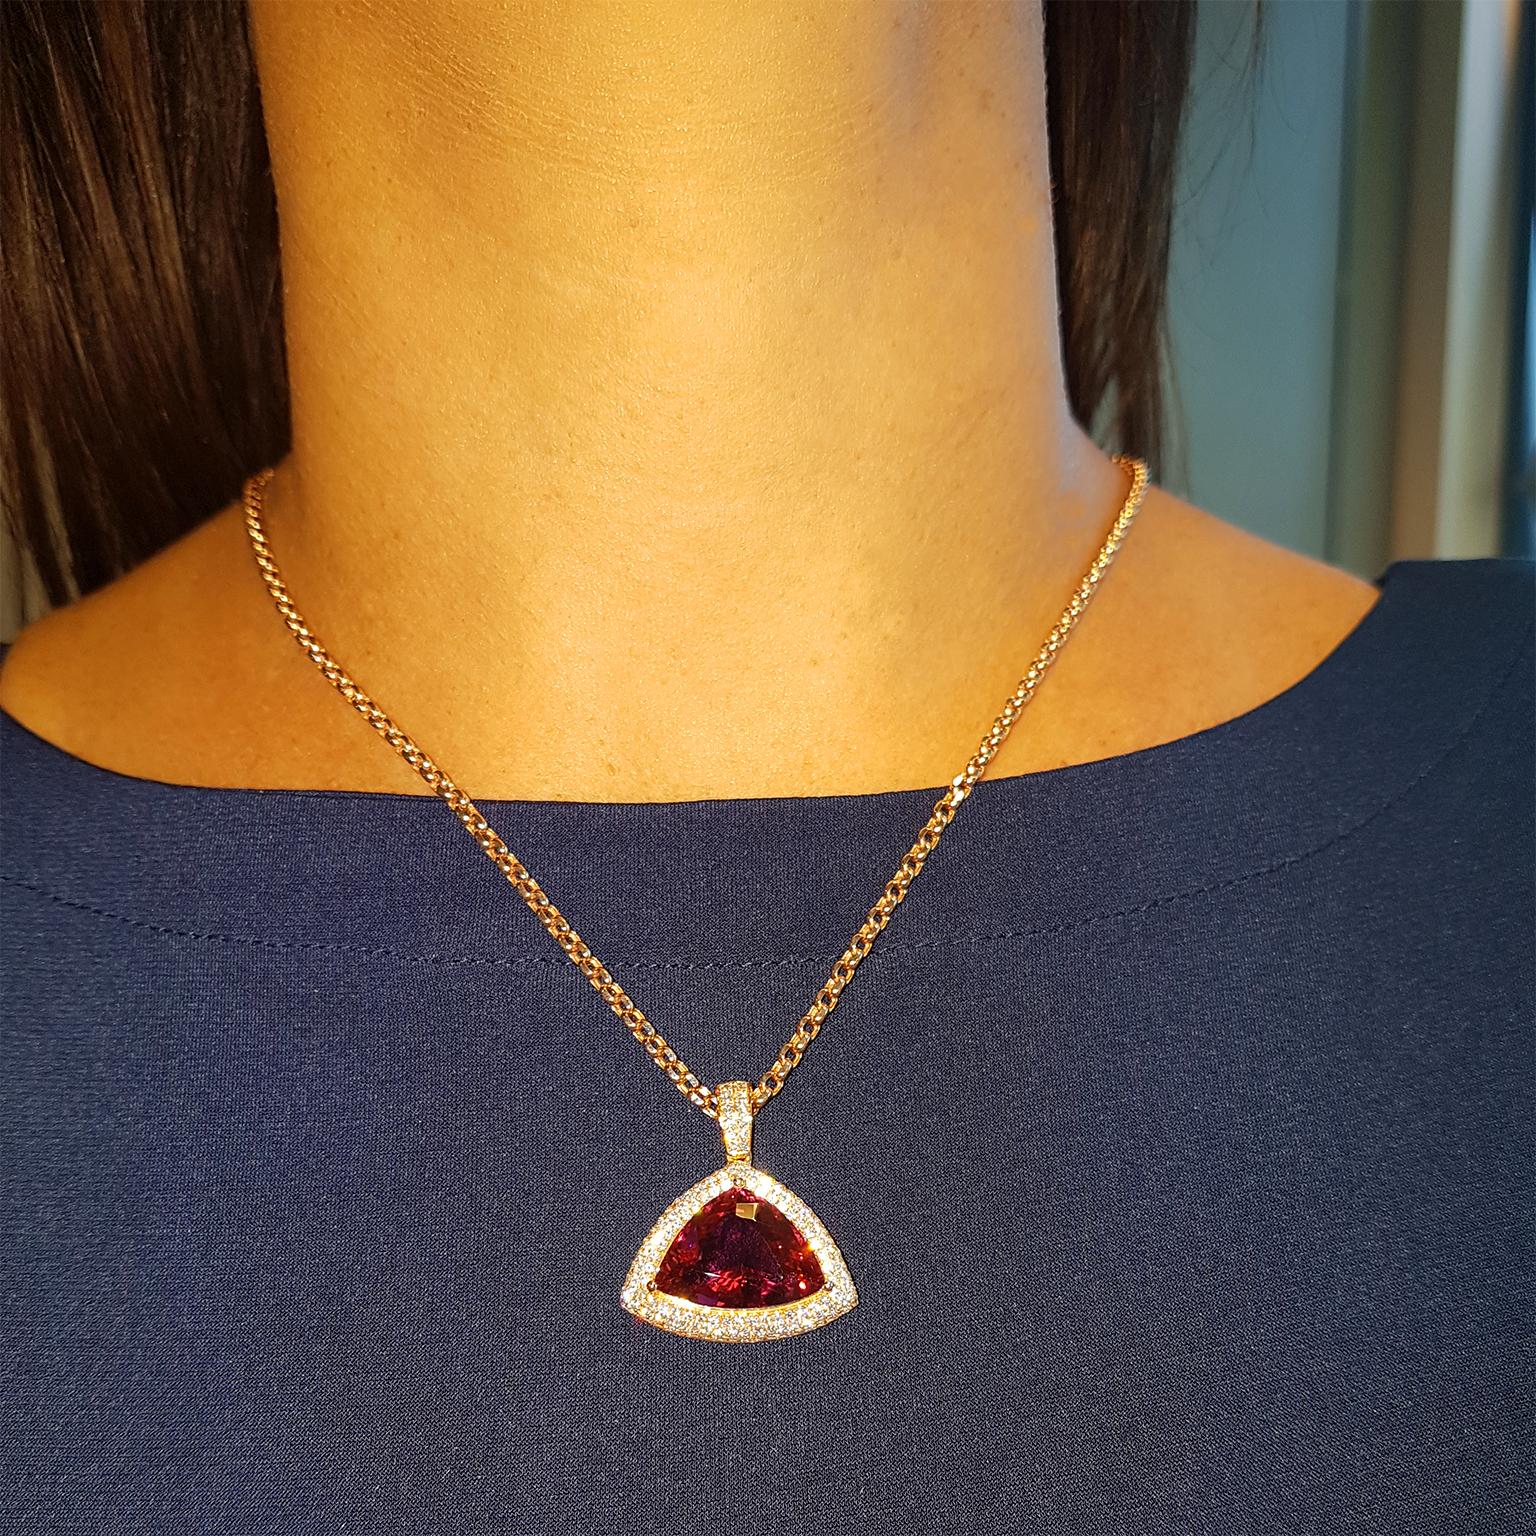 PERFECT PINK! This magnificent cocktail pendant has been crafted in 18ct Rose Gold and set with 1.43ct of glittering fine white diamonds & a perfect 12.59ct vivid-pink Tourmaline. One-off & Exclusive!  18ct 18 inch chain included.